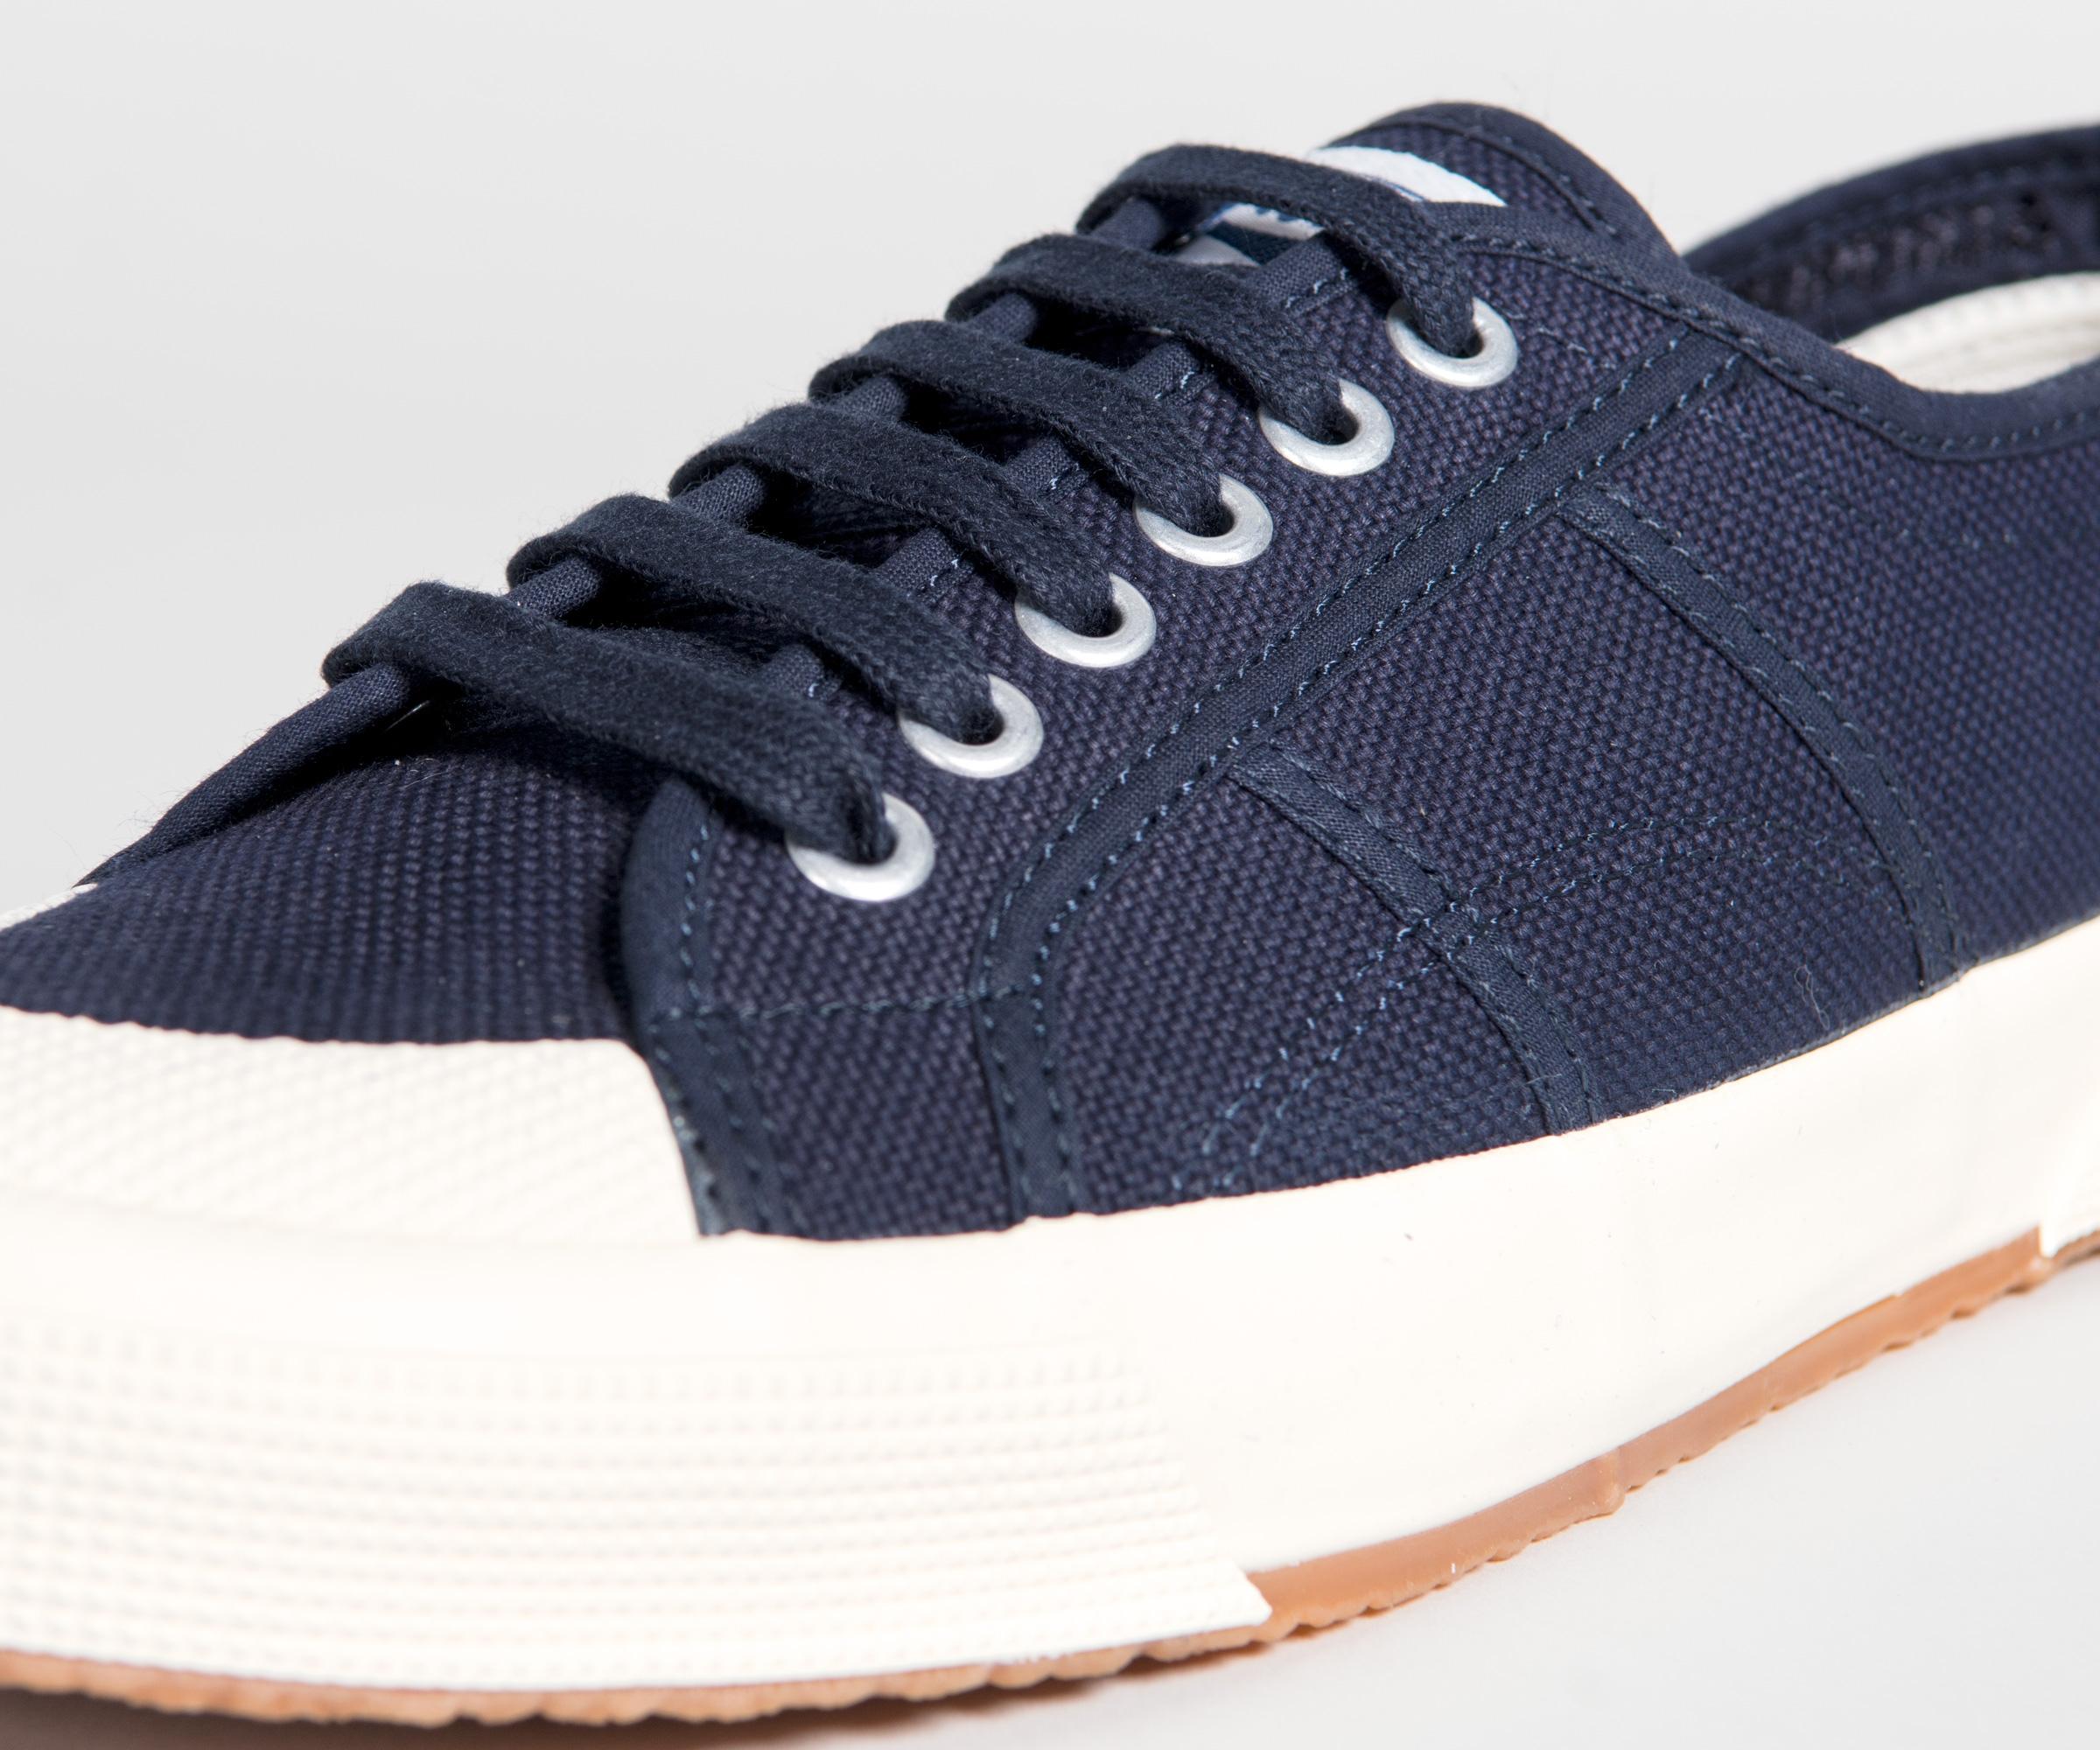 Superga '2390' Cotu Trainers Navy in Blue for Men - Save 35% - Lyst